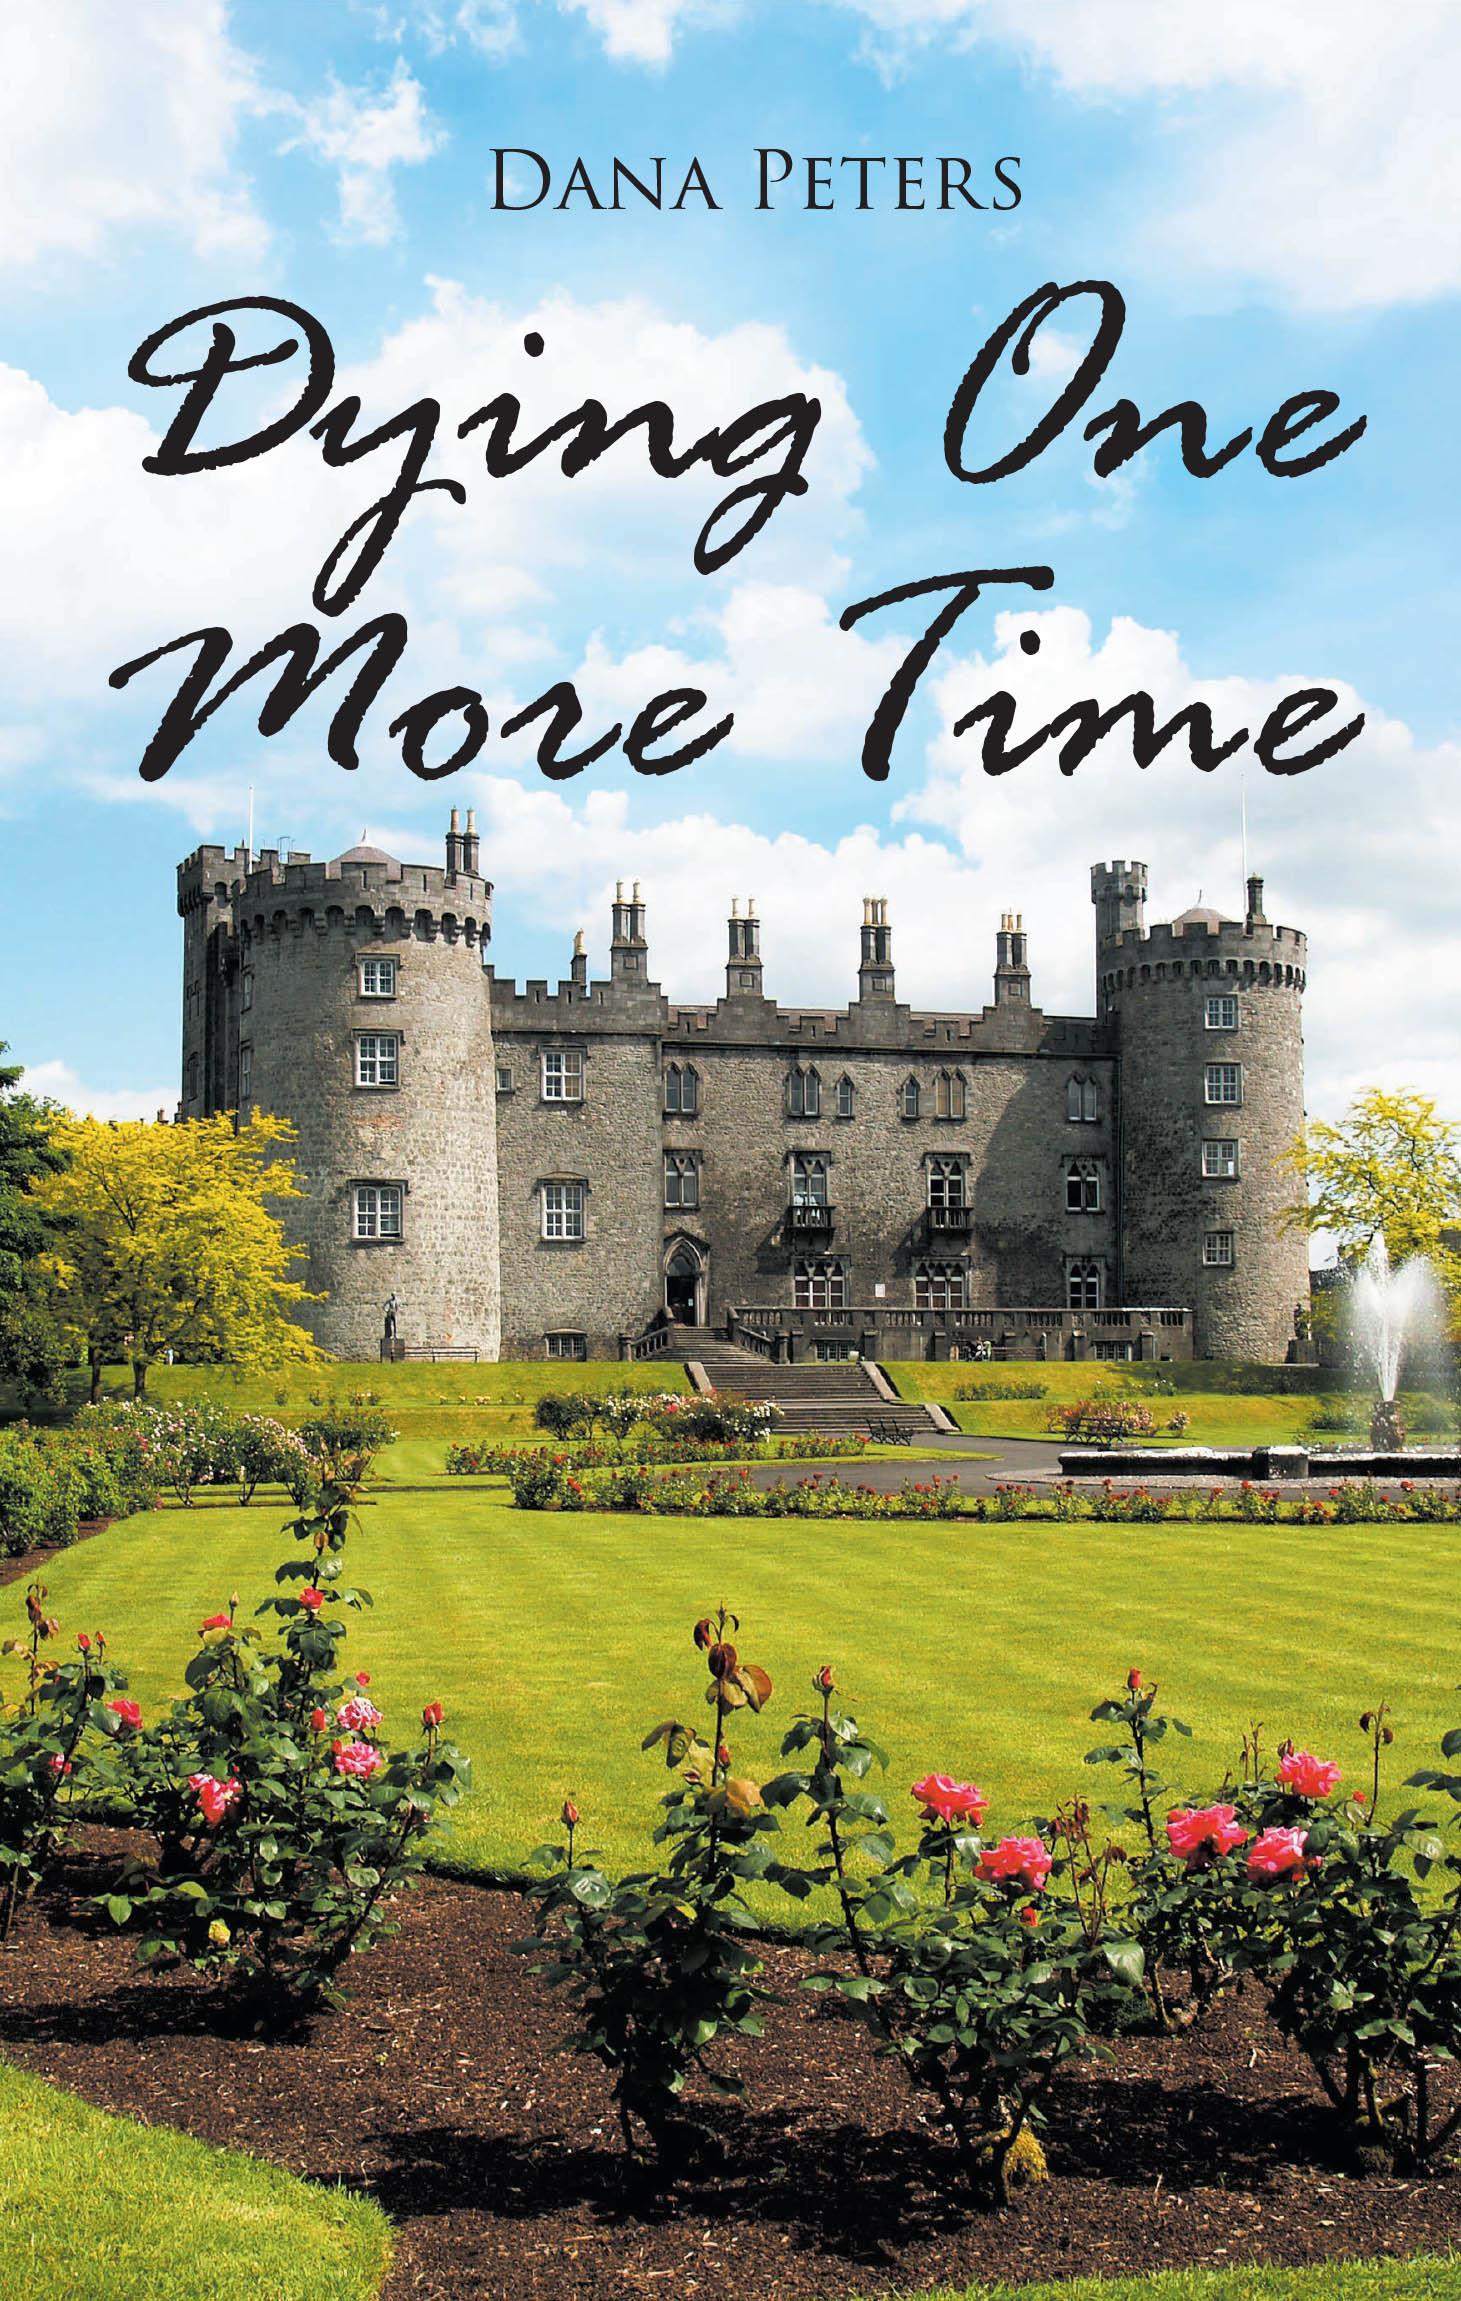 Author Dana Peters’s New Book, "Dying One More Time," Follows the Daughter of an Irish Marquess Who Secretly Works as a Professional Assassin